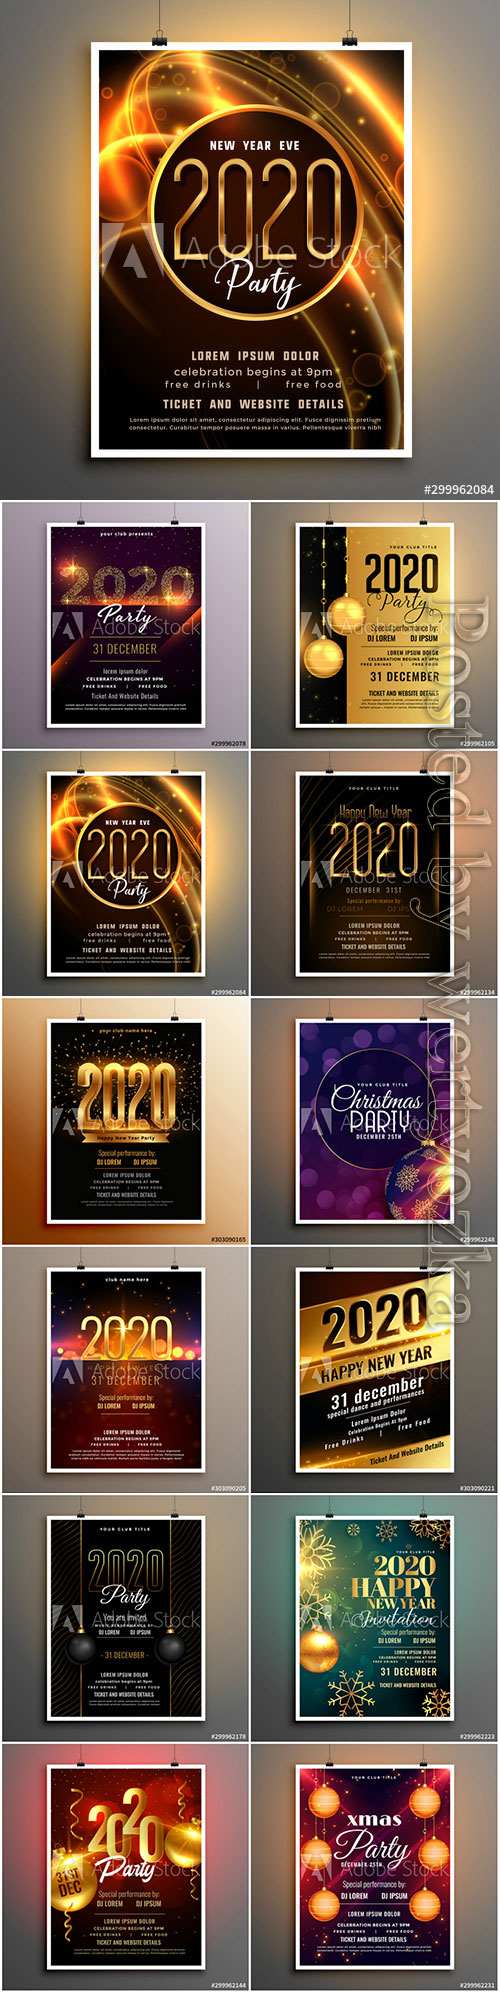 2020 new year shiny party event flyer design template